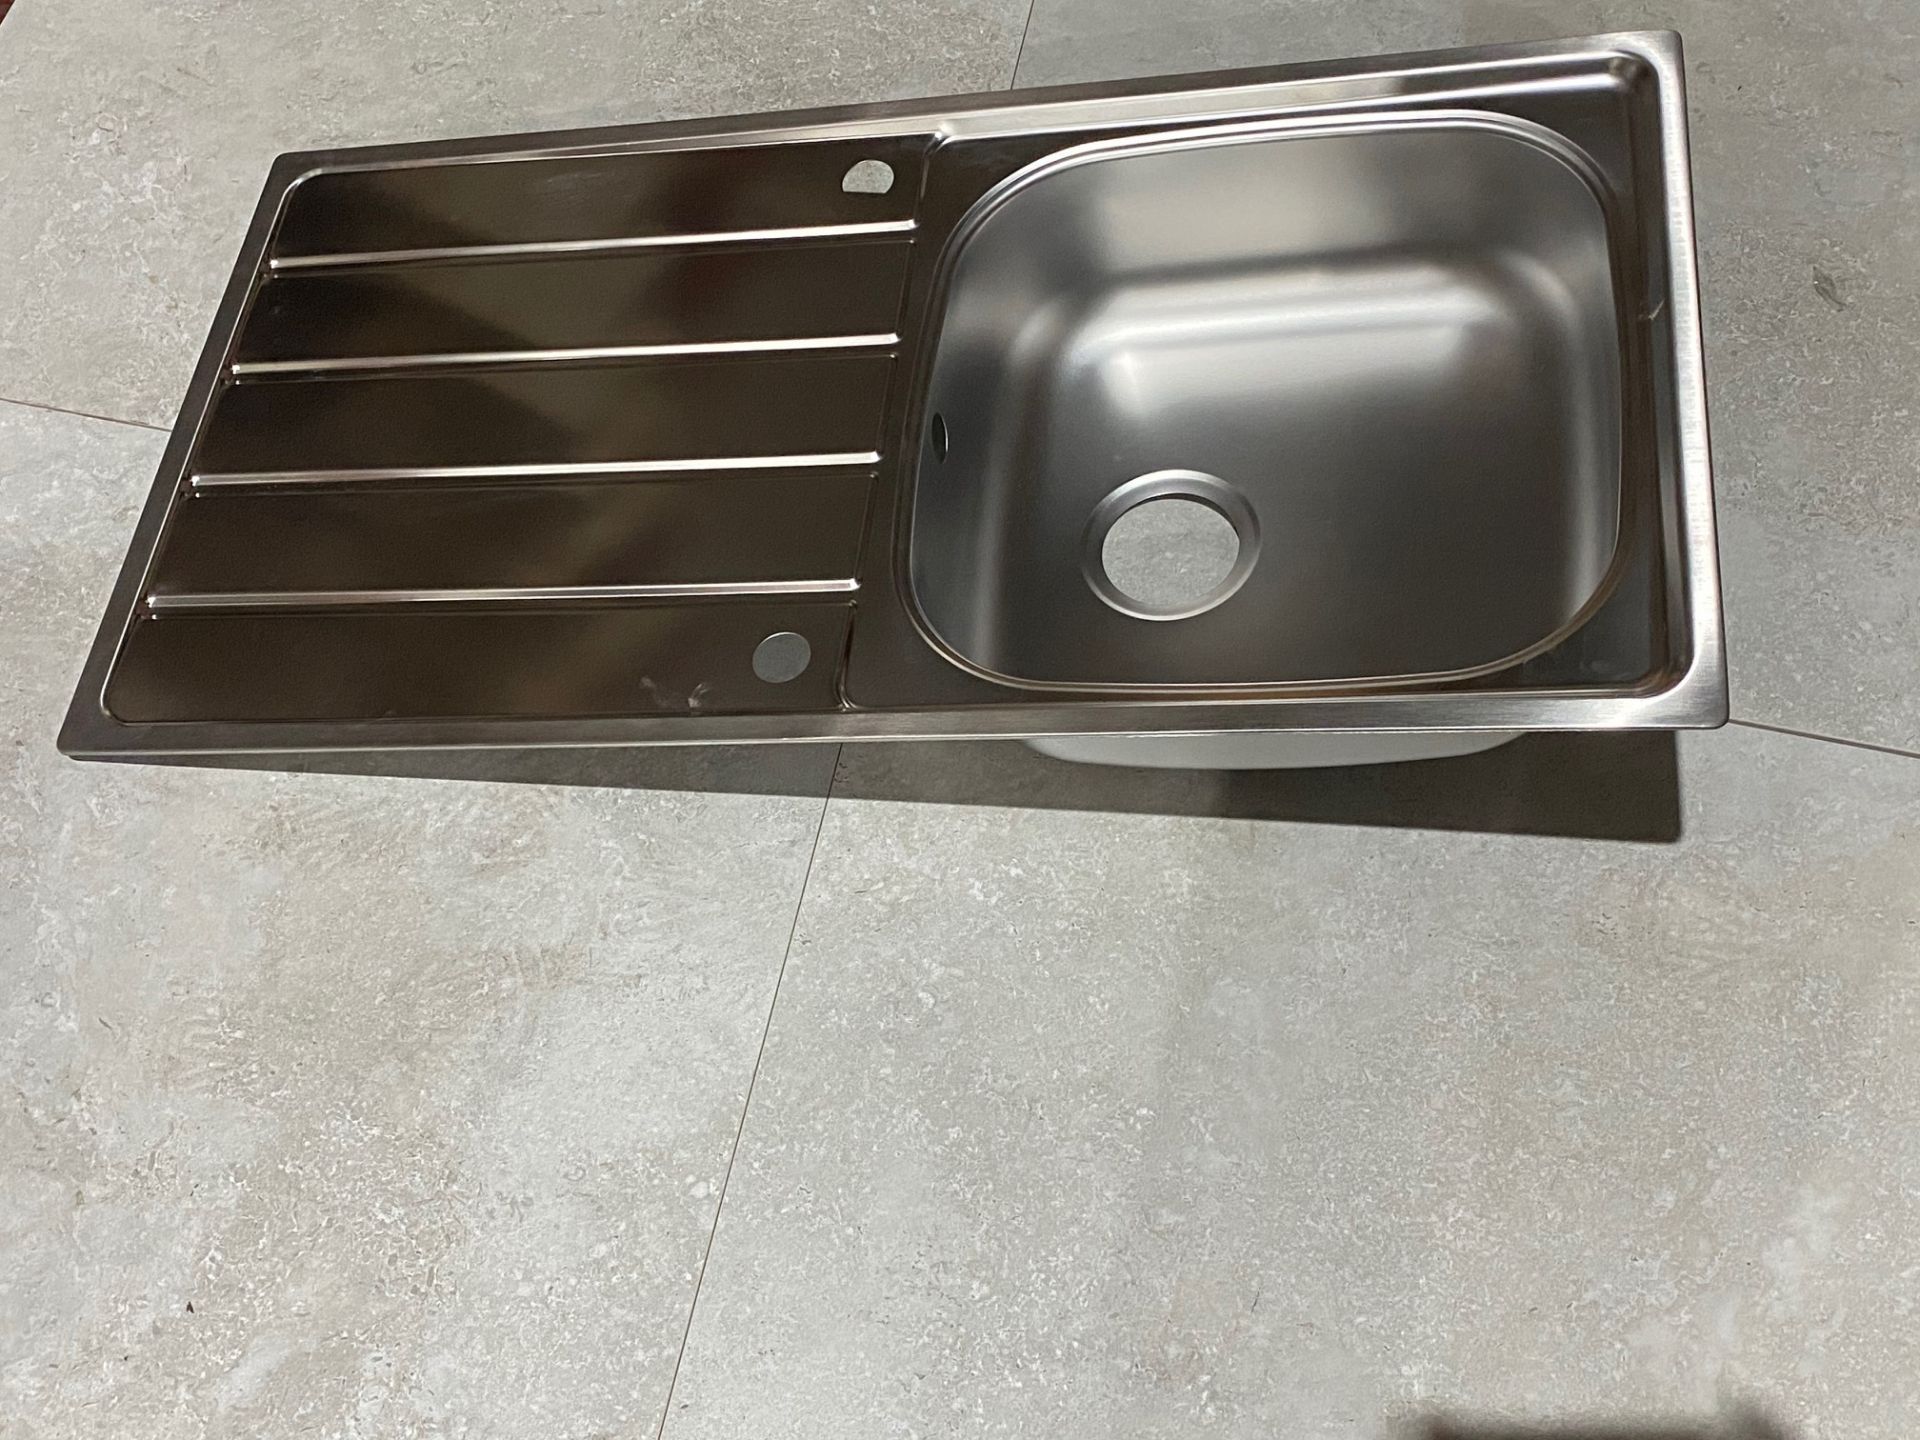 New (H115) 970x500mm Teka Stainless Steel Sink Bowl.  New (H115) 970x500mm Teka Stainless Steel Sink